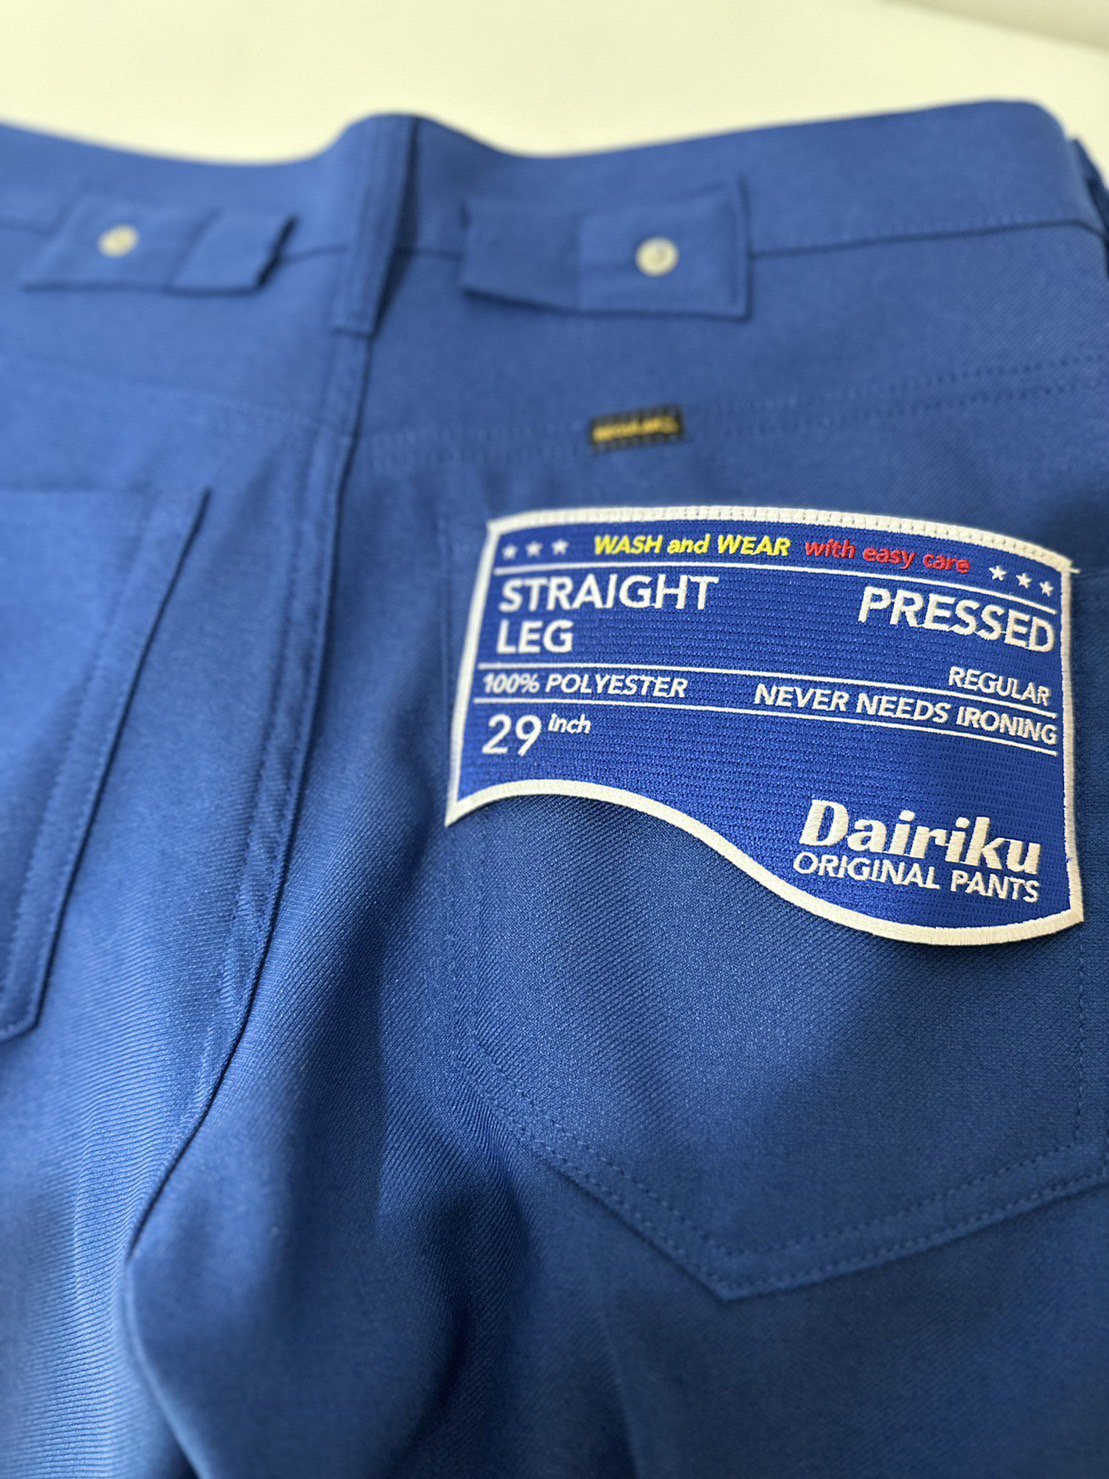 DAIRIKU<br />Straight Pressed Pants / Royal Blue<img class='new_mark_img2' src='https://img.shop-pro.jp/img/new/icons14.gif' style='border:none;display:inline;margin:0px;padding:0px;width:auto;' />